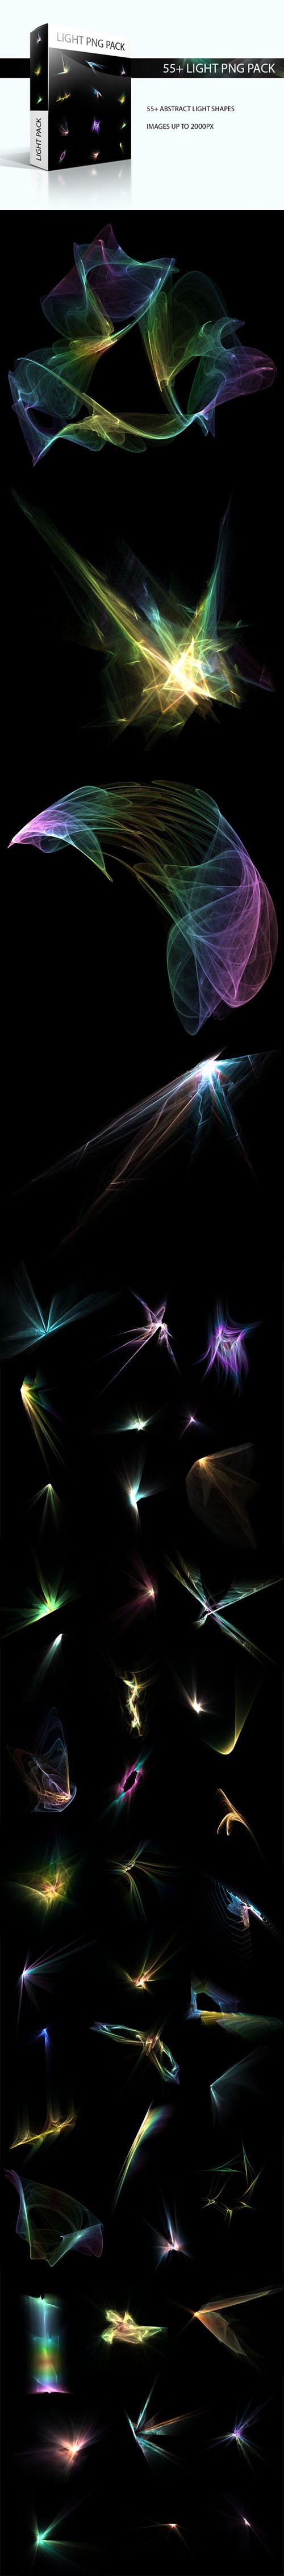 50+ Abstract Light Shapes PNG Pack